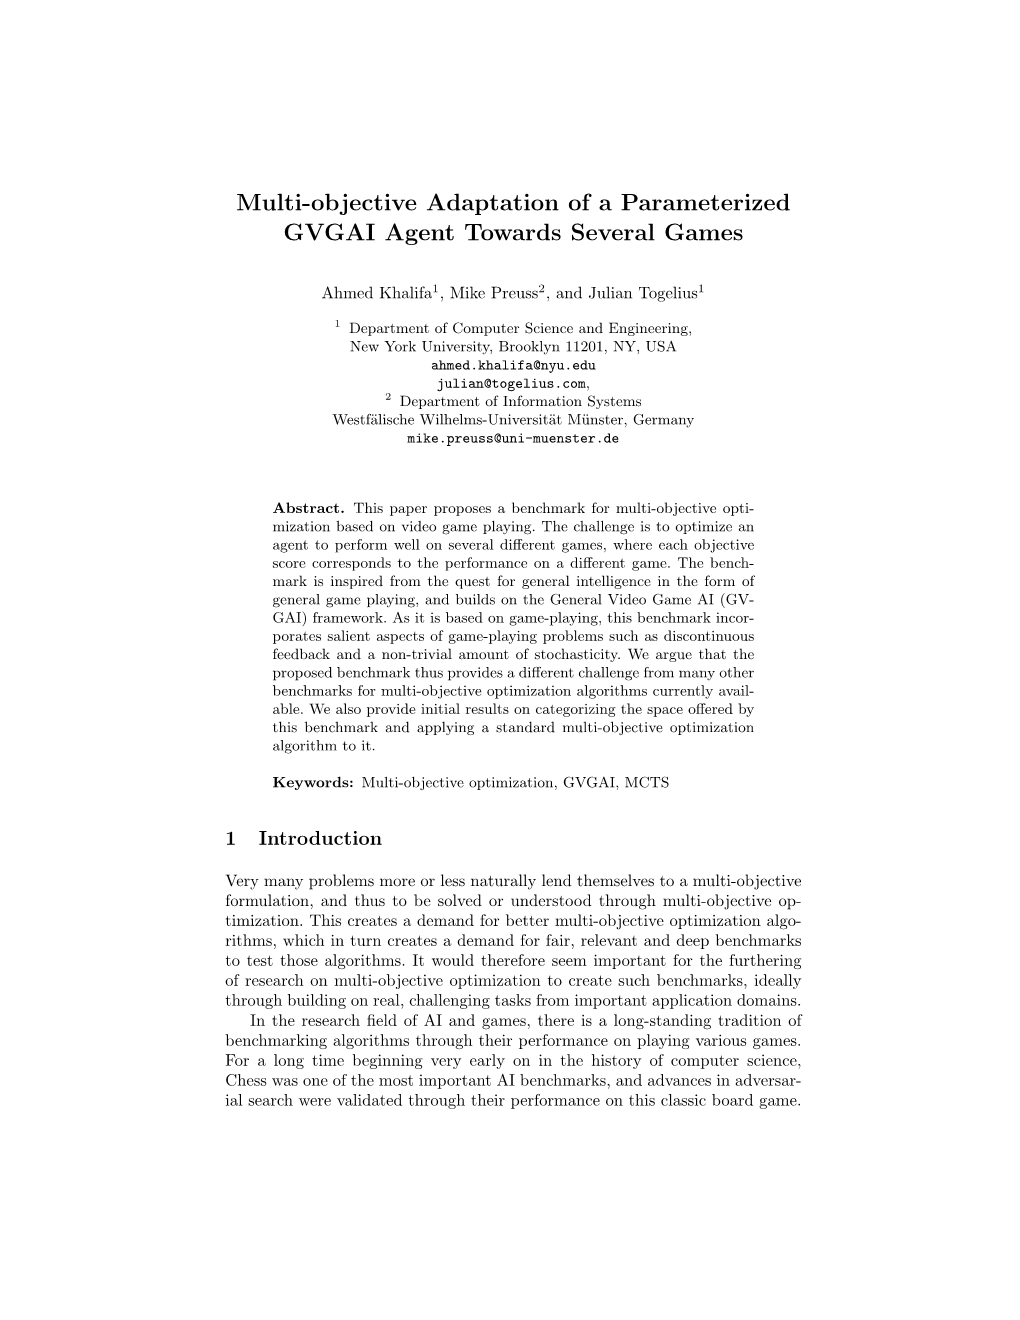 Multi-Objective Adaptation of a Parameterized GVGAI Agent Towards Several Games